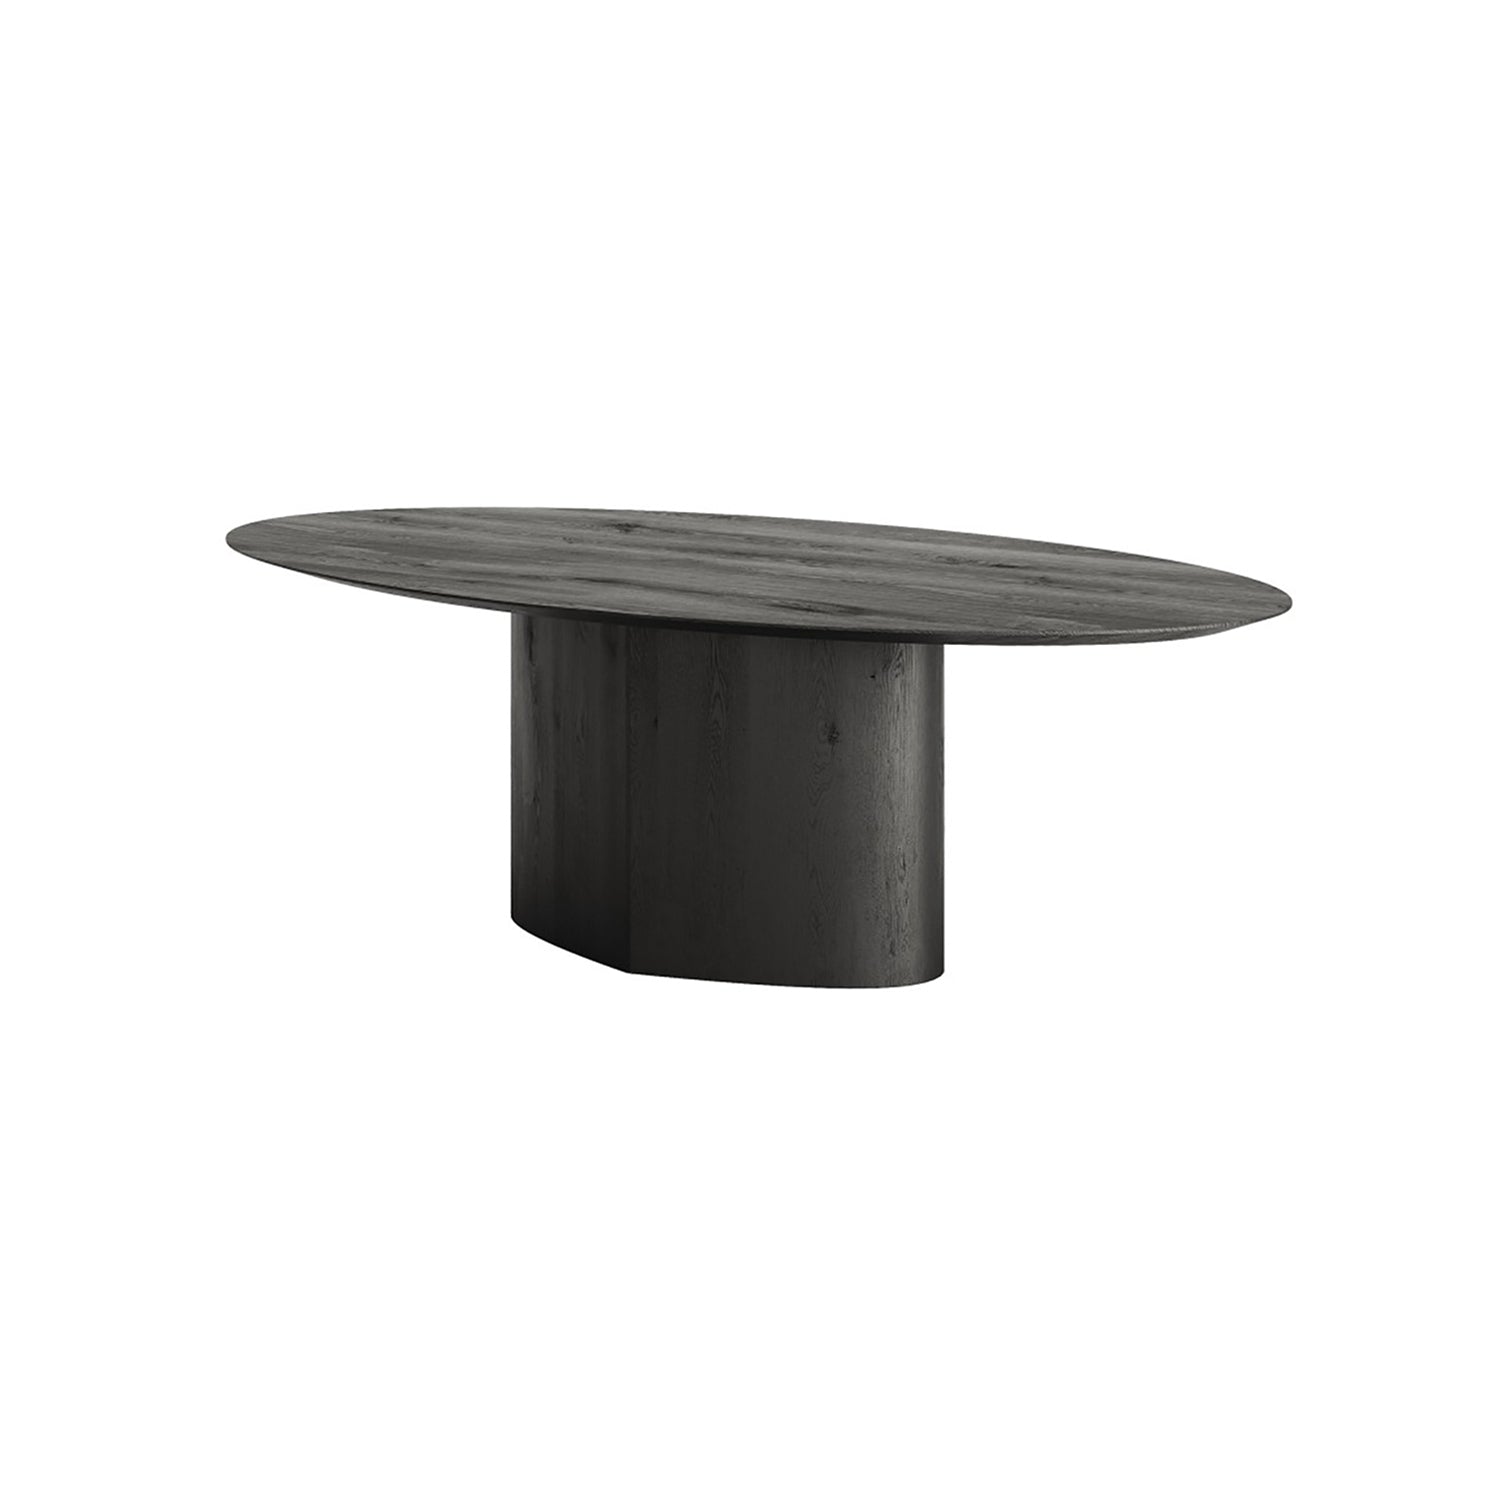 Monoplauto Dining Table: Oval + 102.4